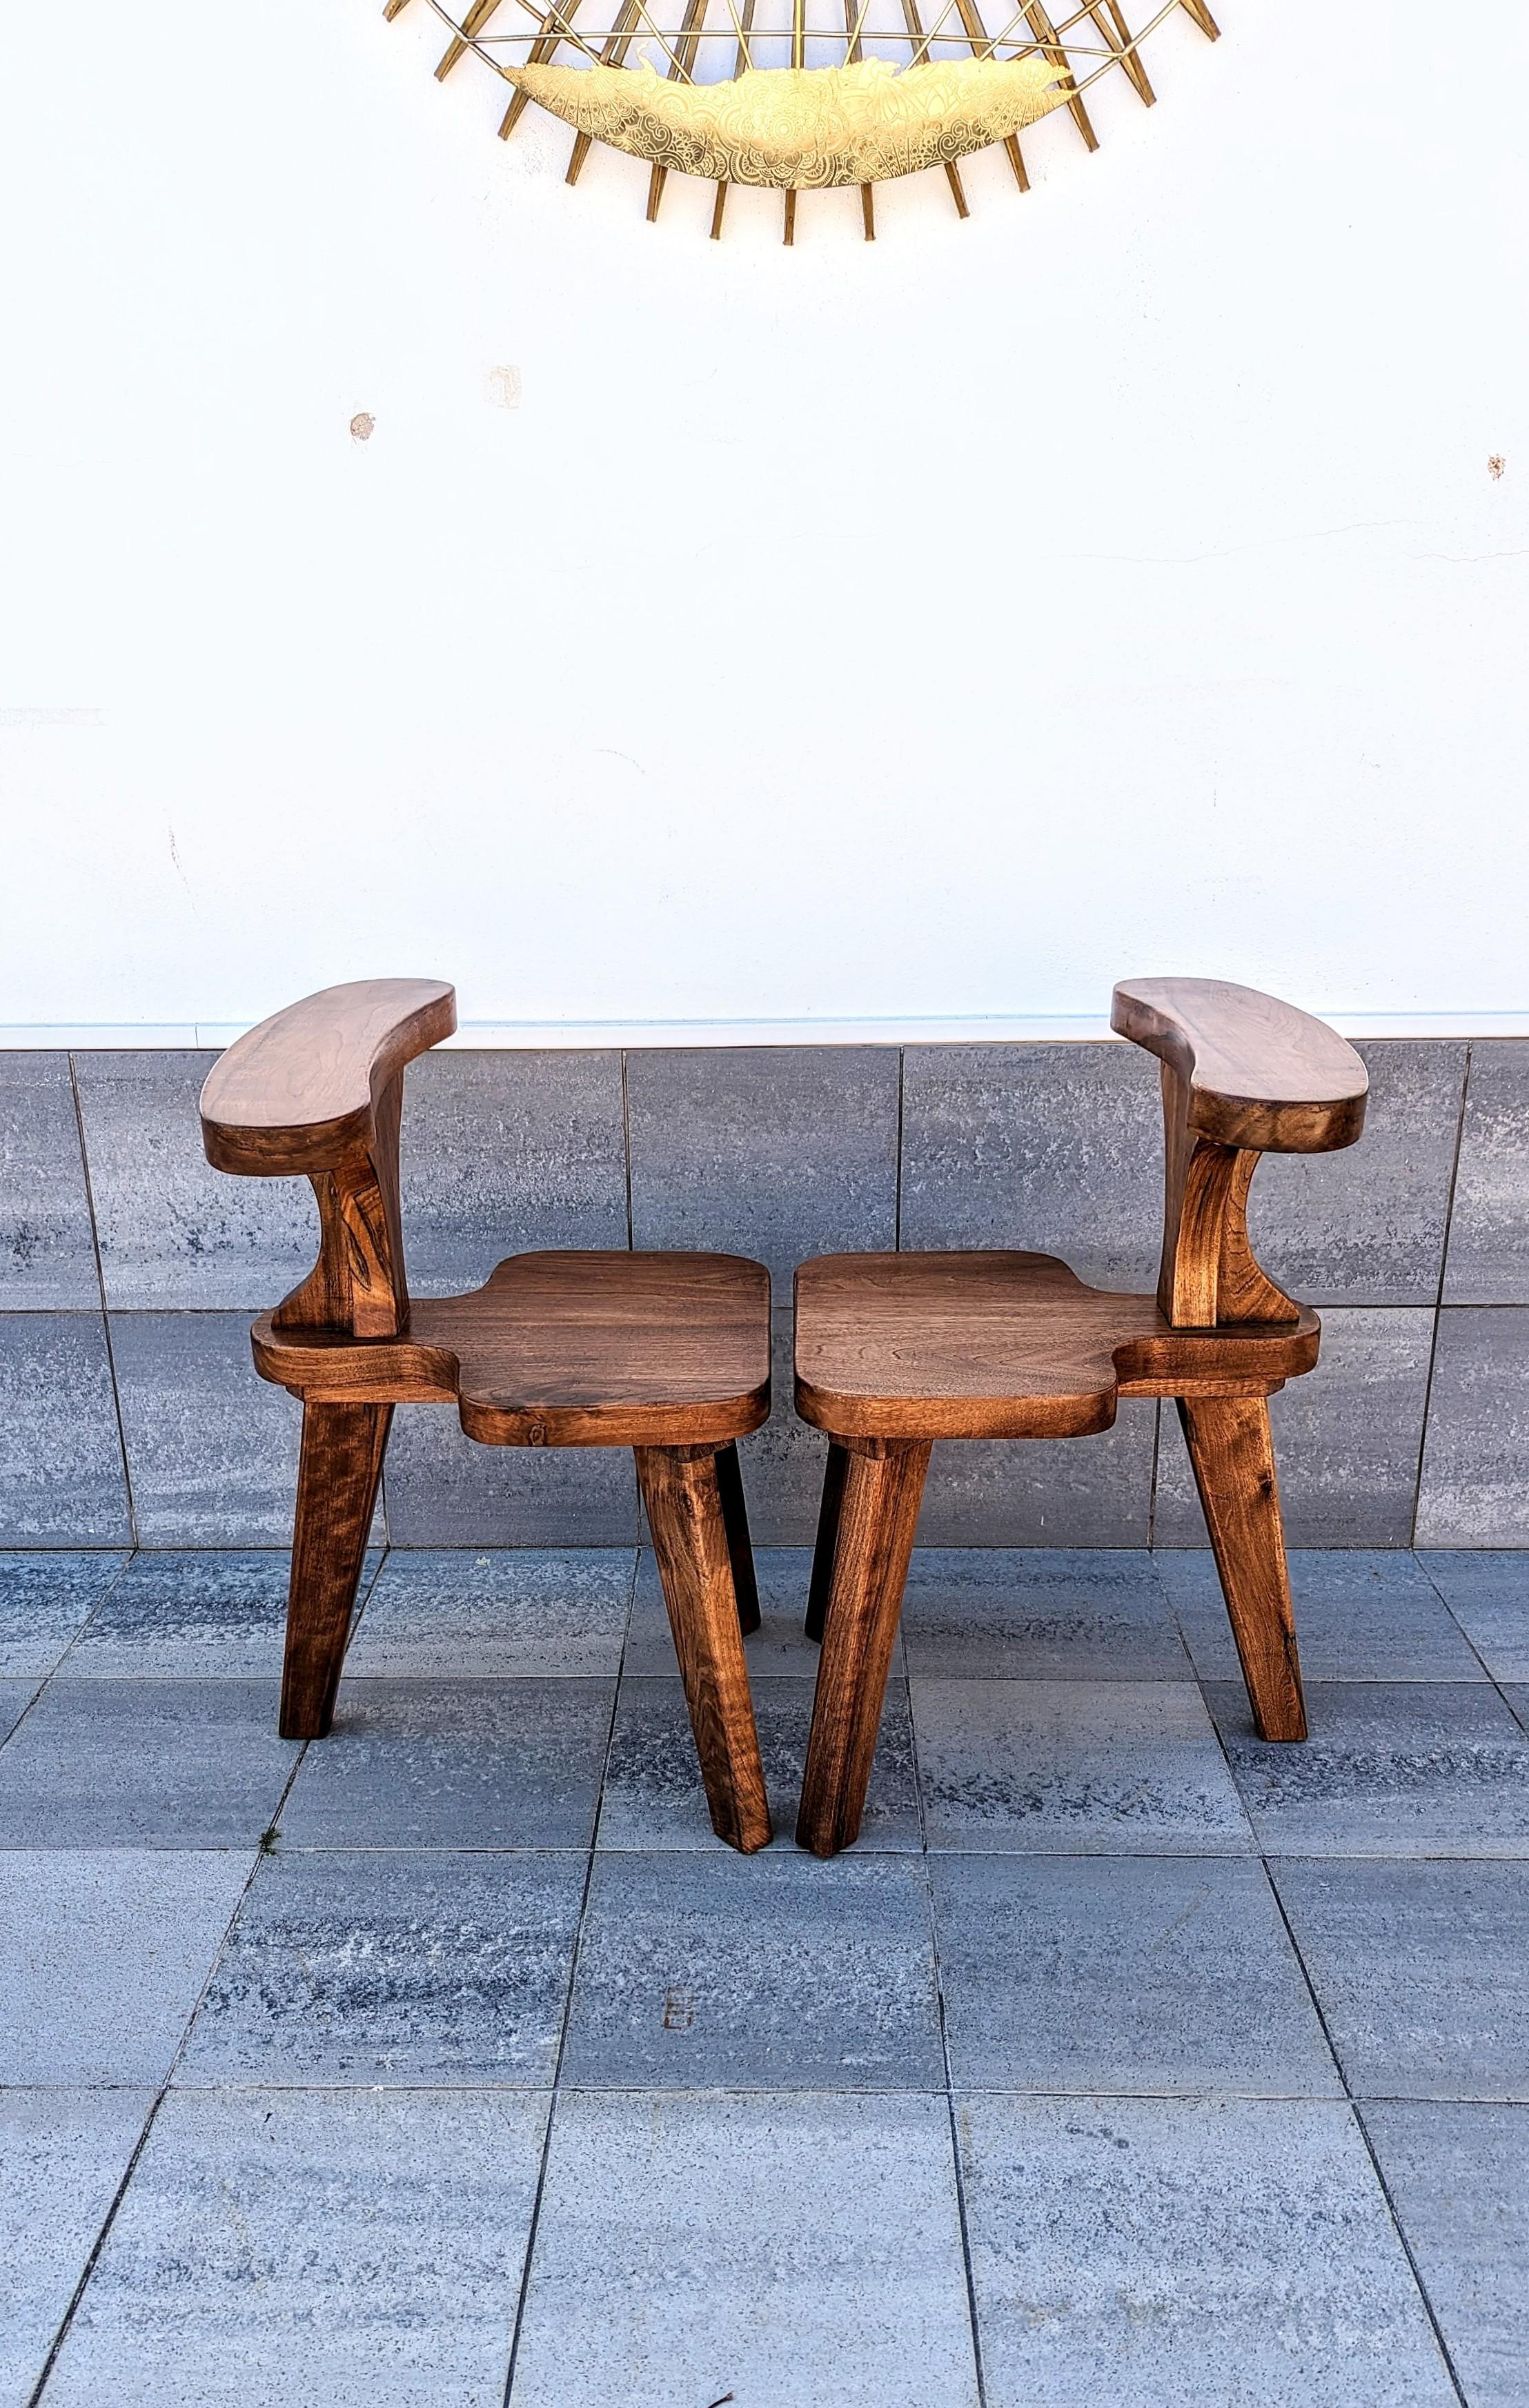 Persian Brutalist Oak Smoking Chairs, 1960s For Sale